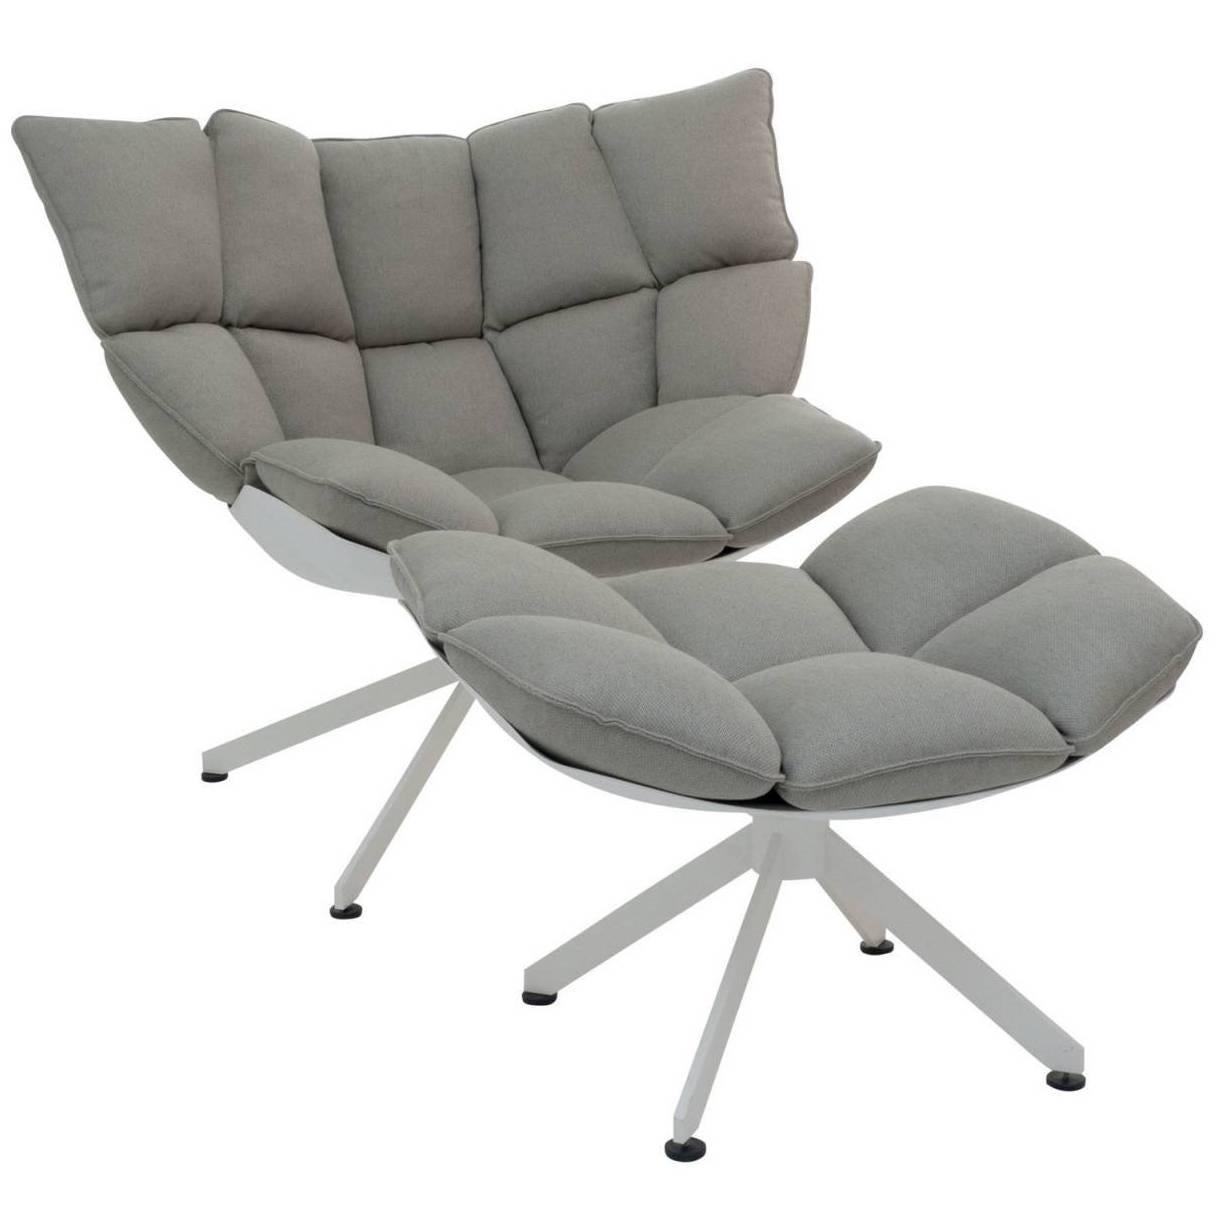 Armchair "Husk" with Stool by Manufacturer B&B Italia in Aluminium Finished For Sale